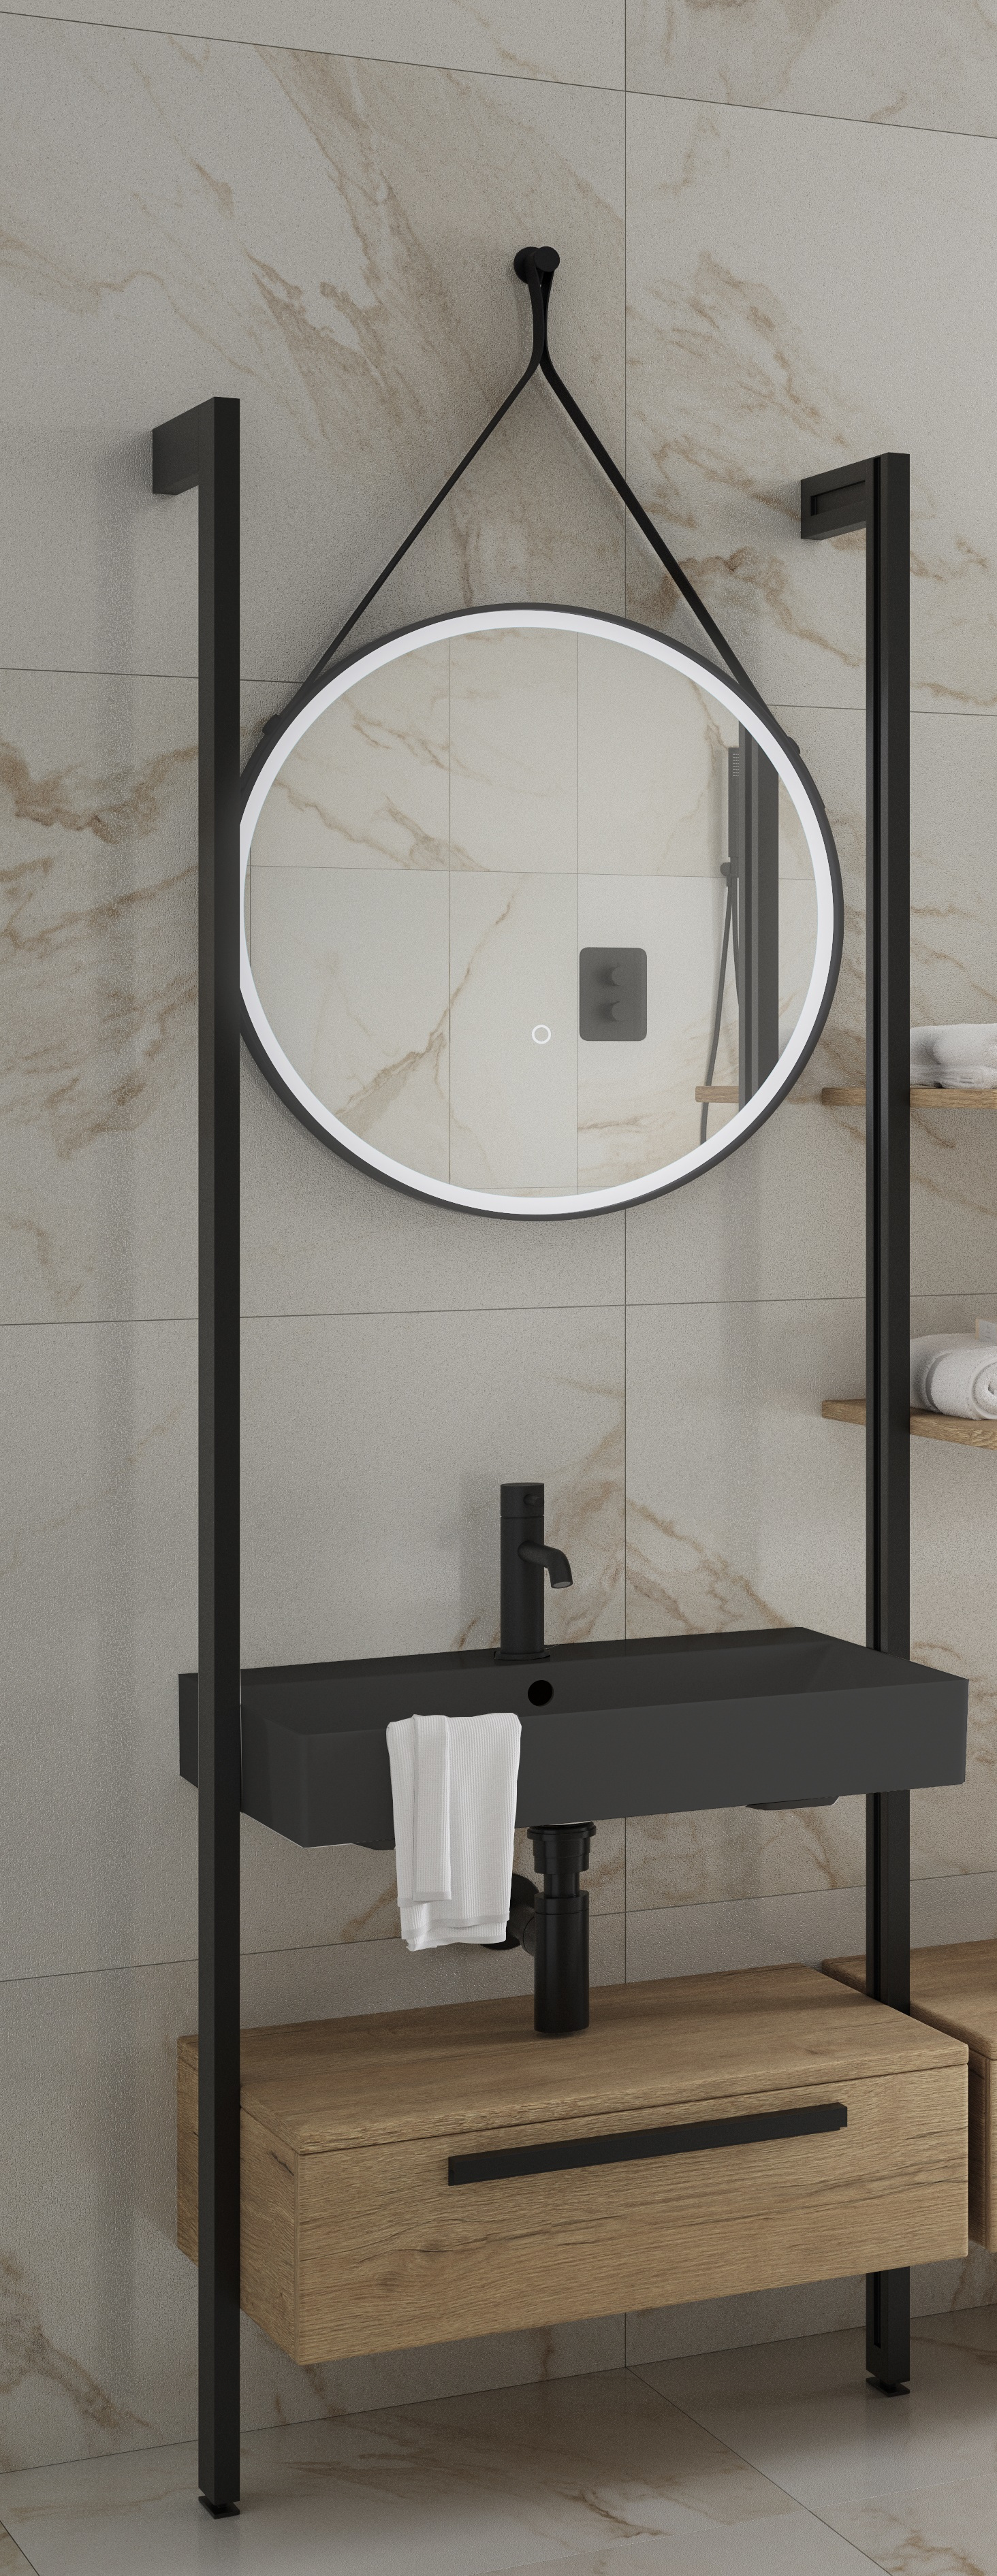 Wickes Rimini Wall System Vanity Unit Only with Black Basin - 600mm